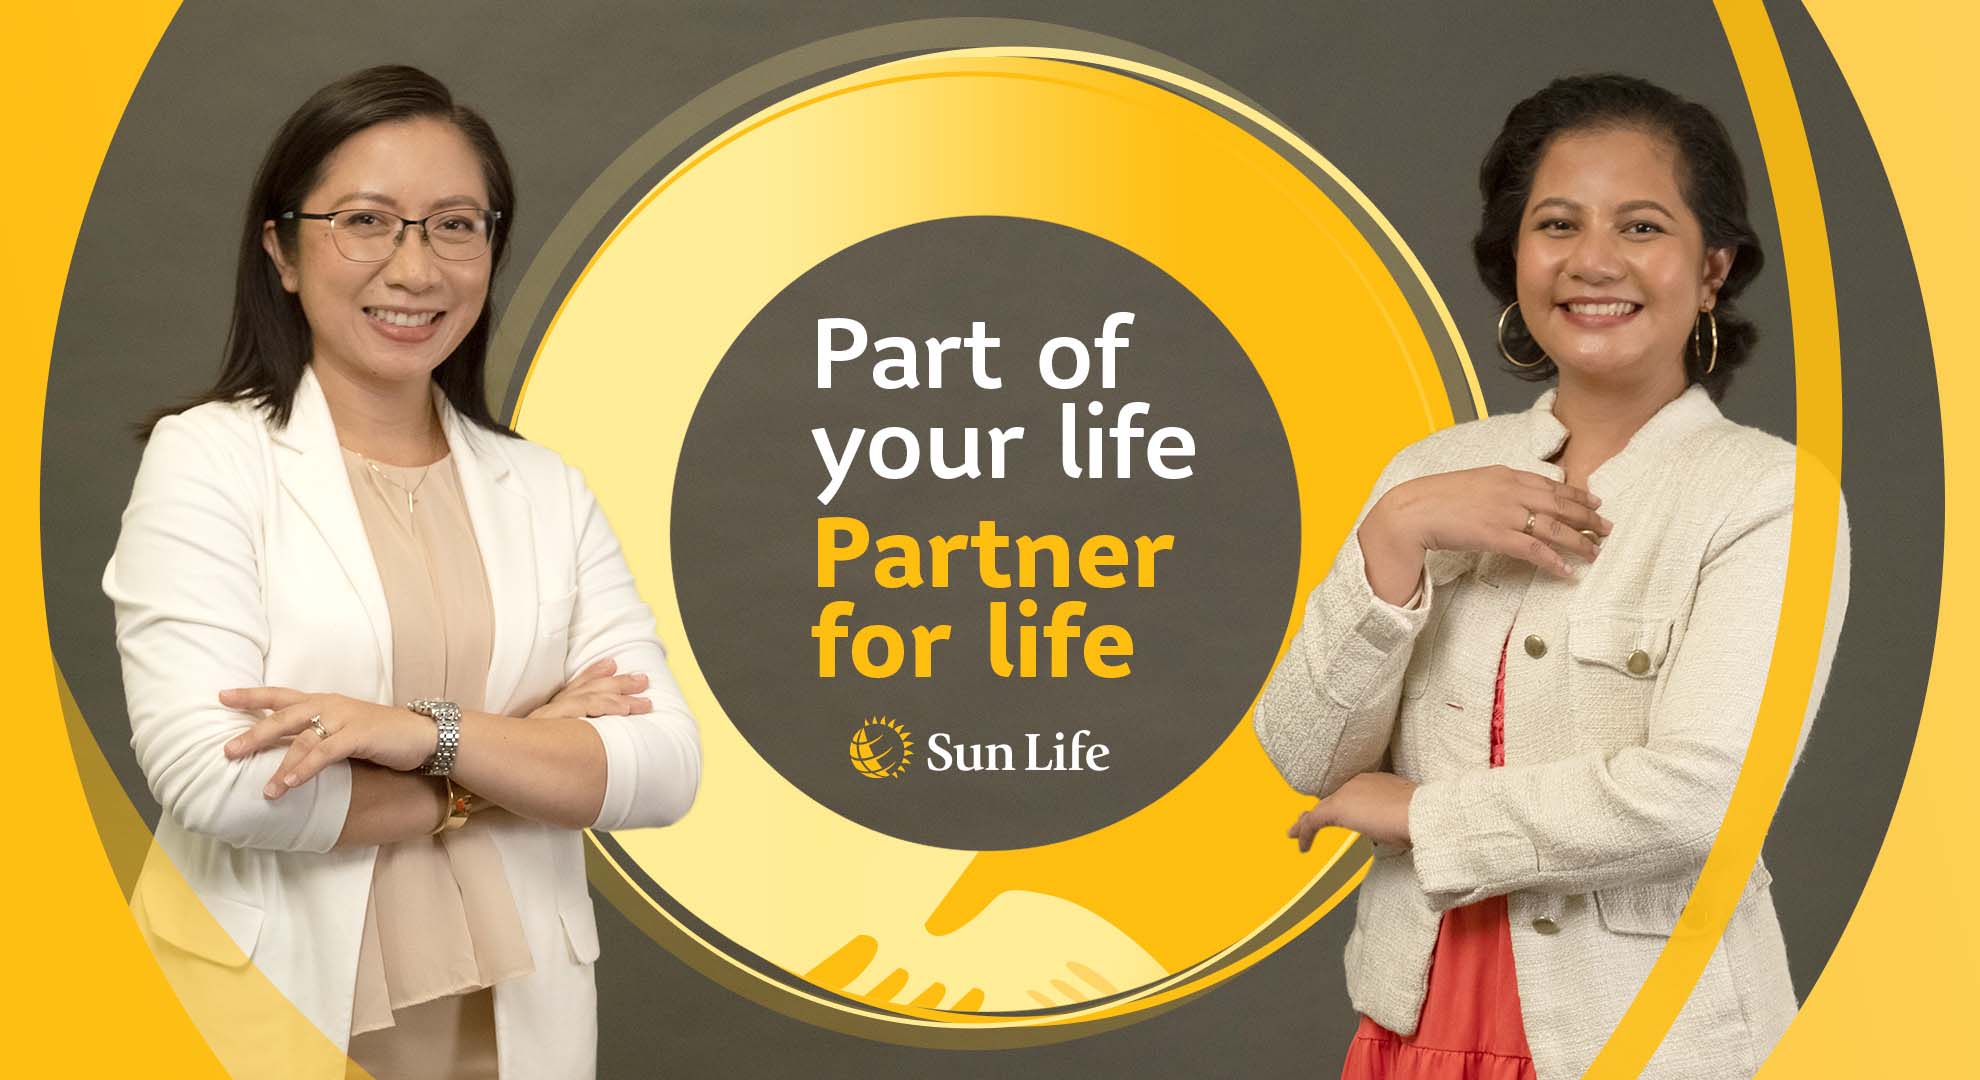 Real Life Client-Advisor Partnerships Shine in Sun Life’s Latest Campaign